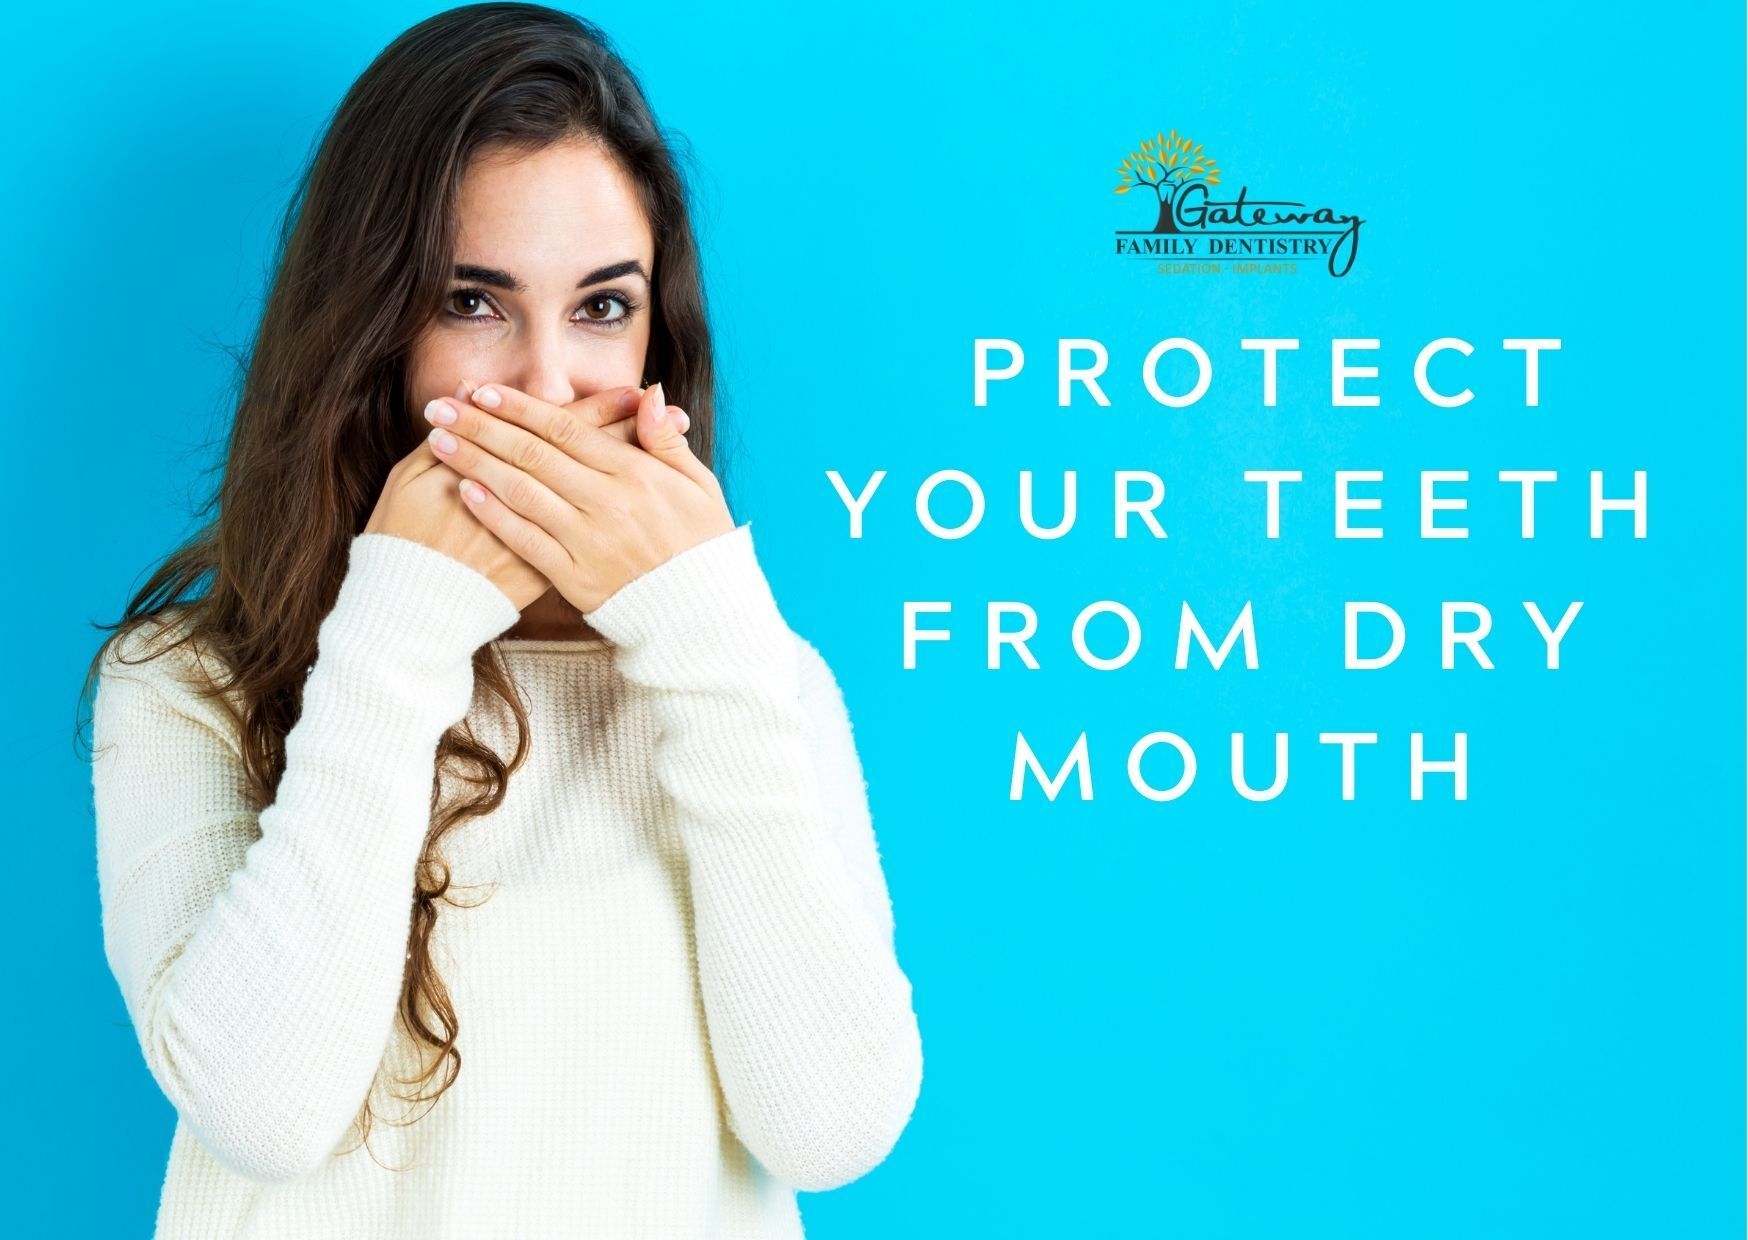 Protect your teeth from dry mouth